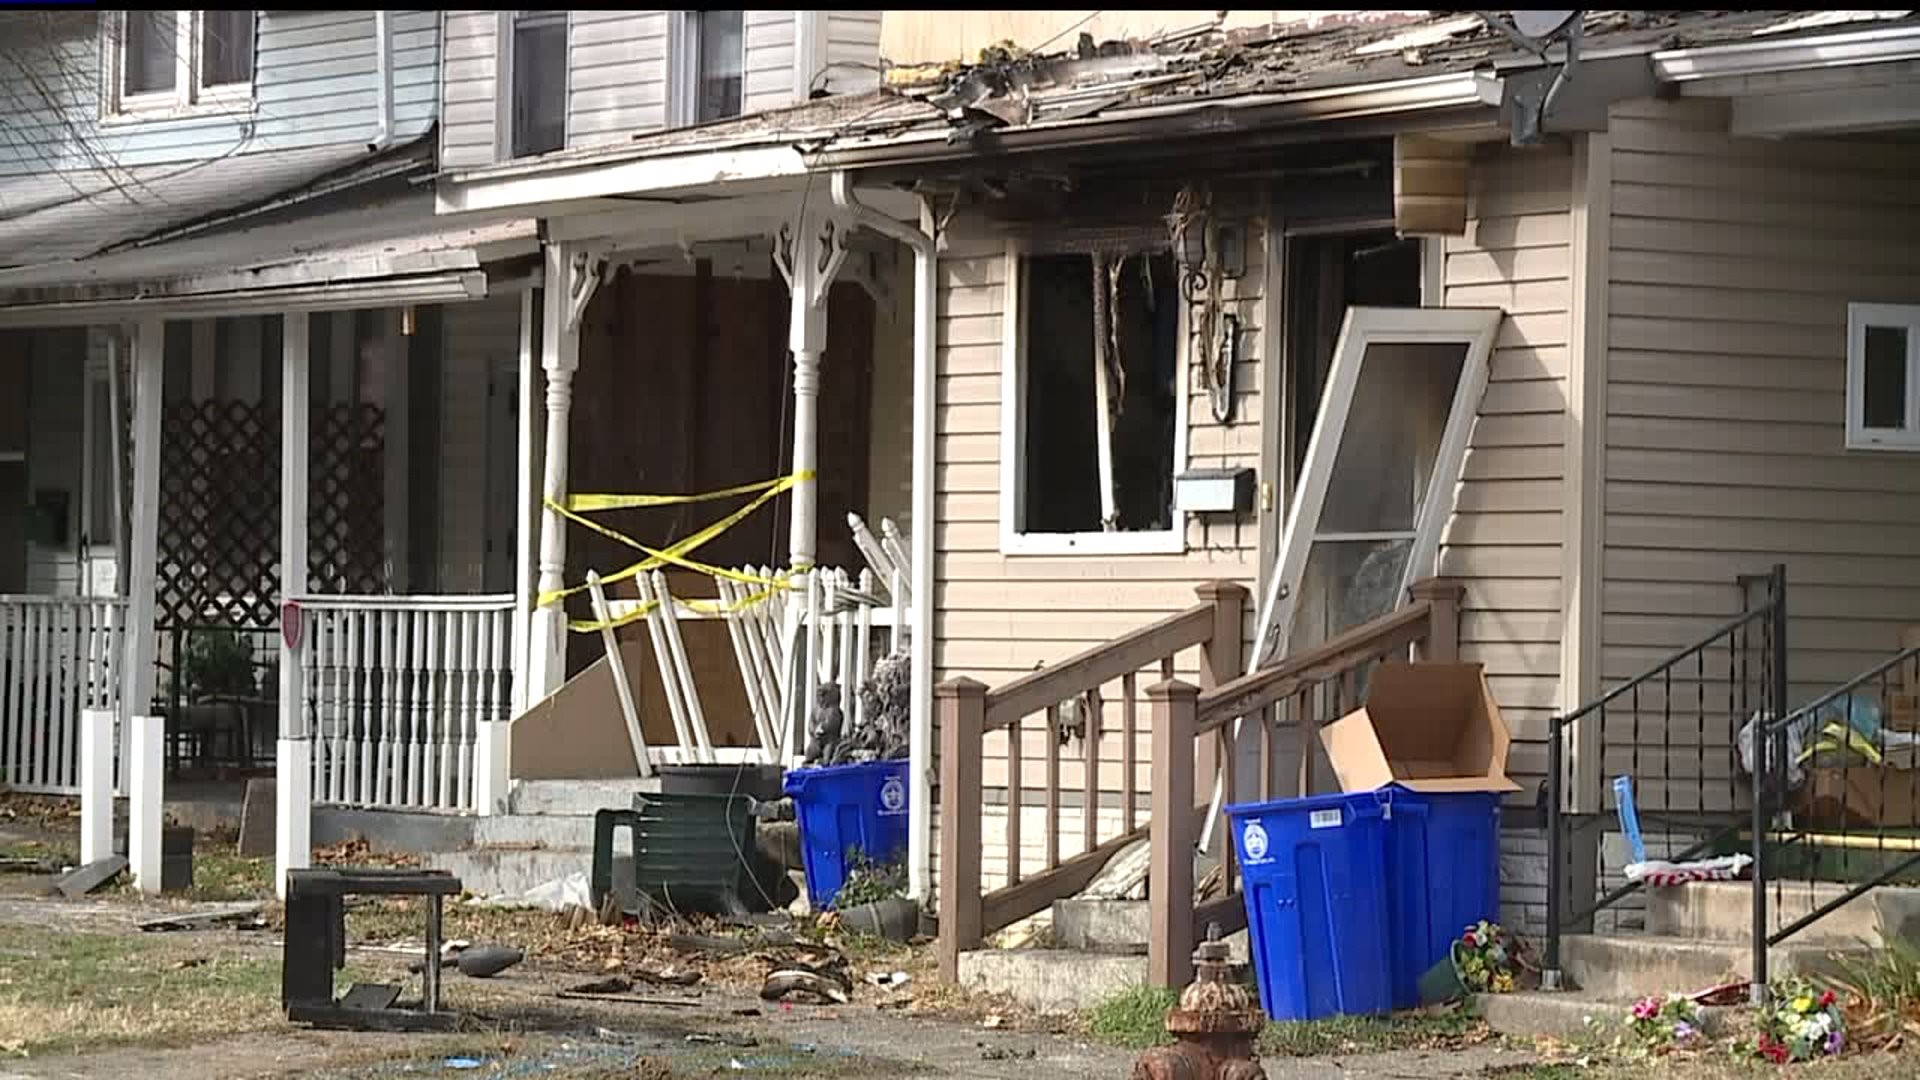 Firefighter injured fighting Harrisburg row home fire